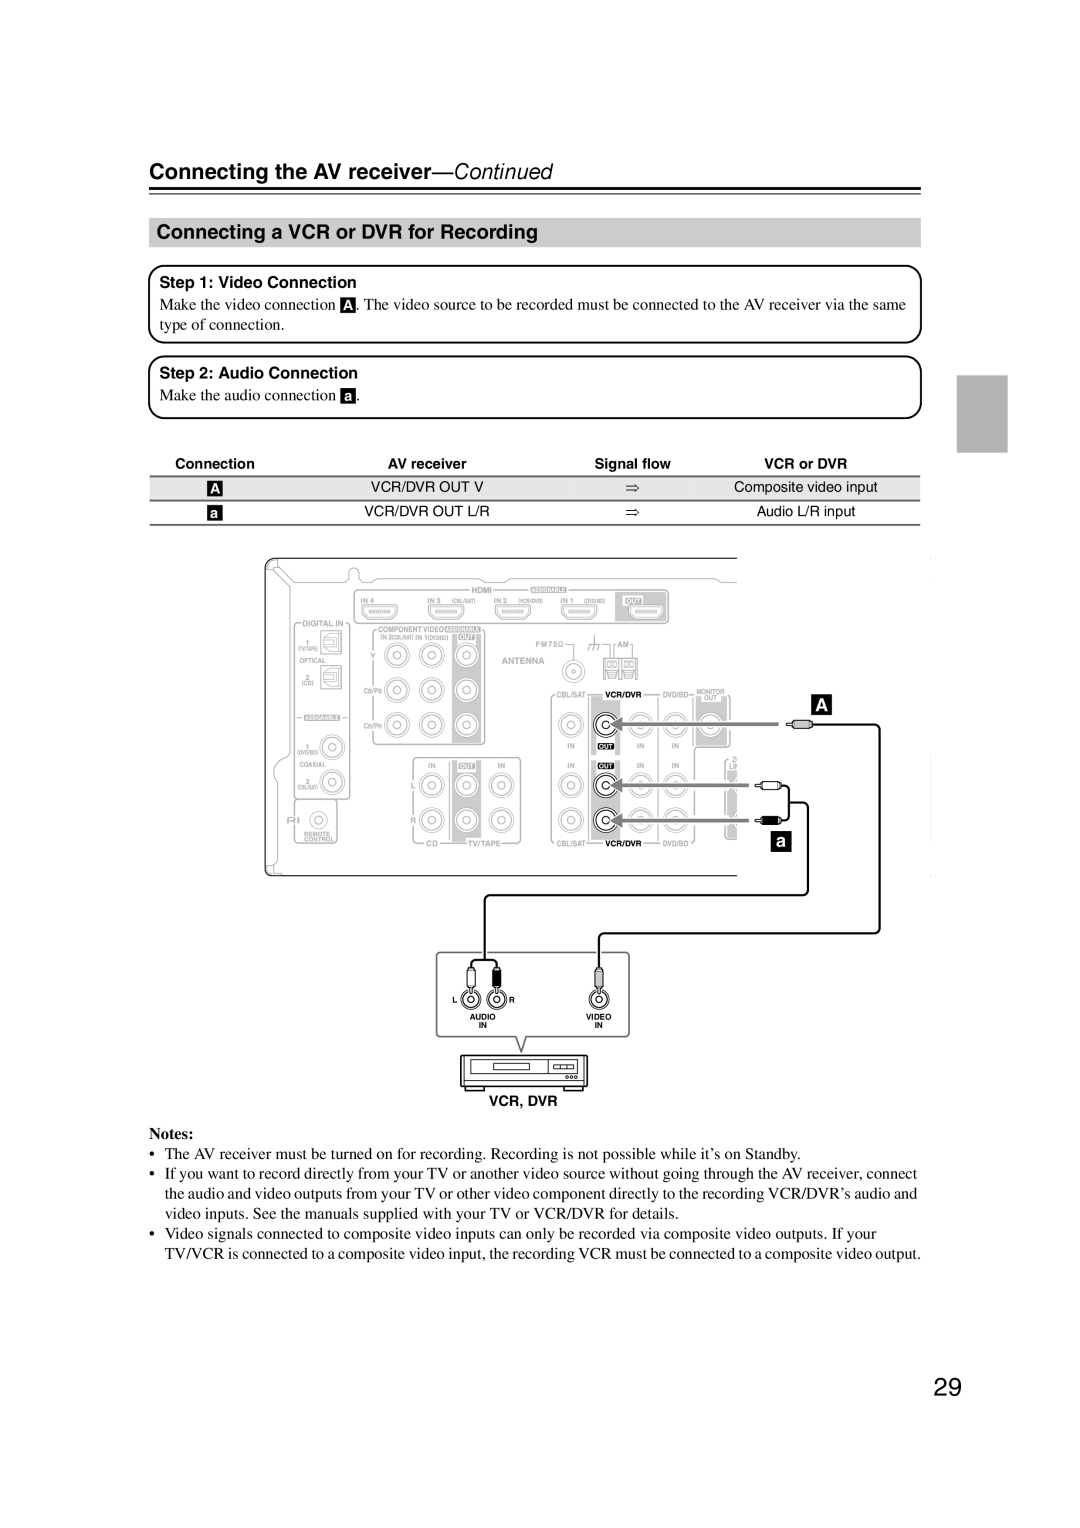 Onkyo SR507, TX-SR577 instruction manual Connecting a VCR or DVR for Recording, Connecting the AV receiver-Continued, Notes 